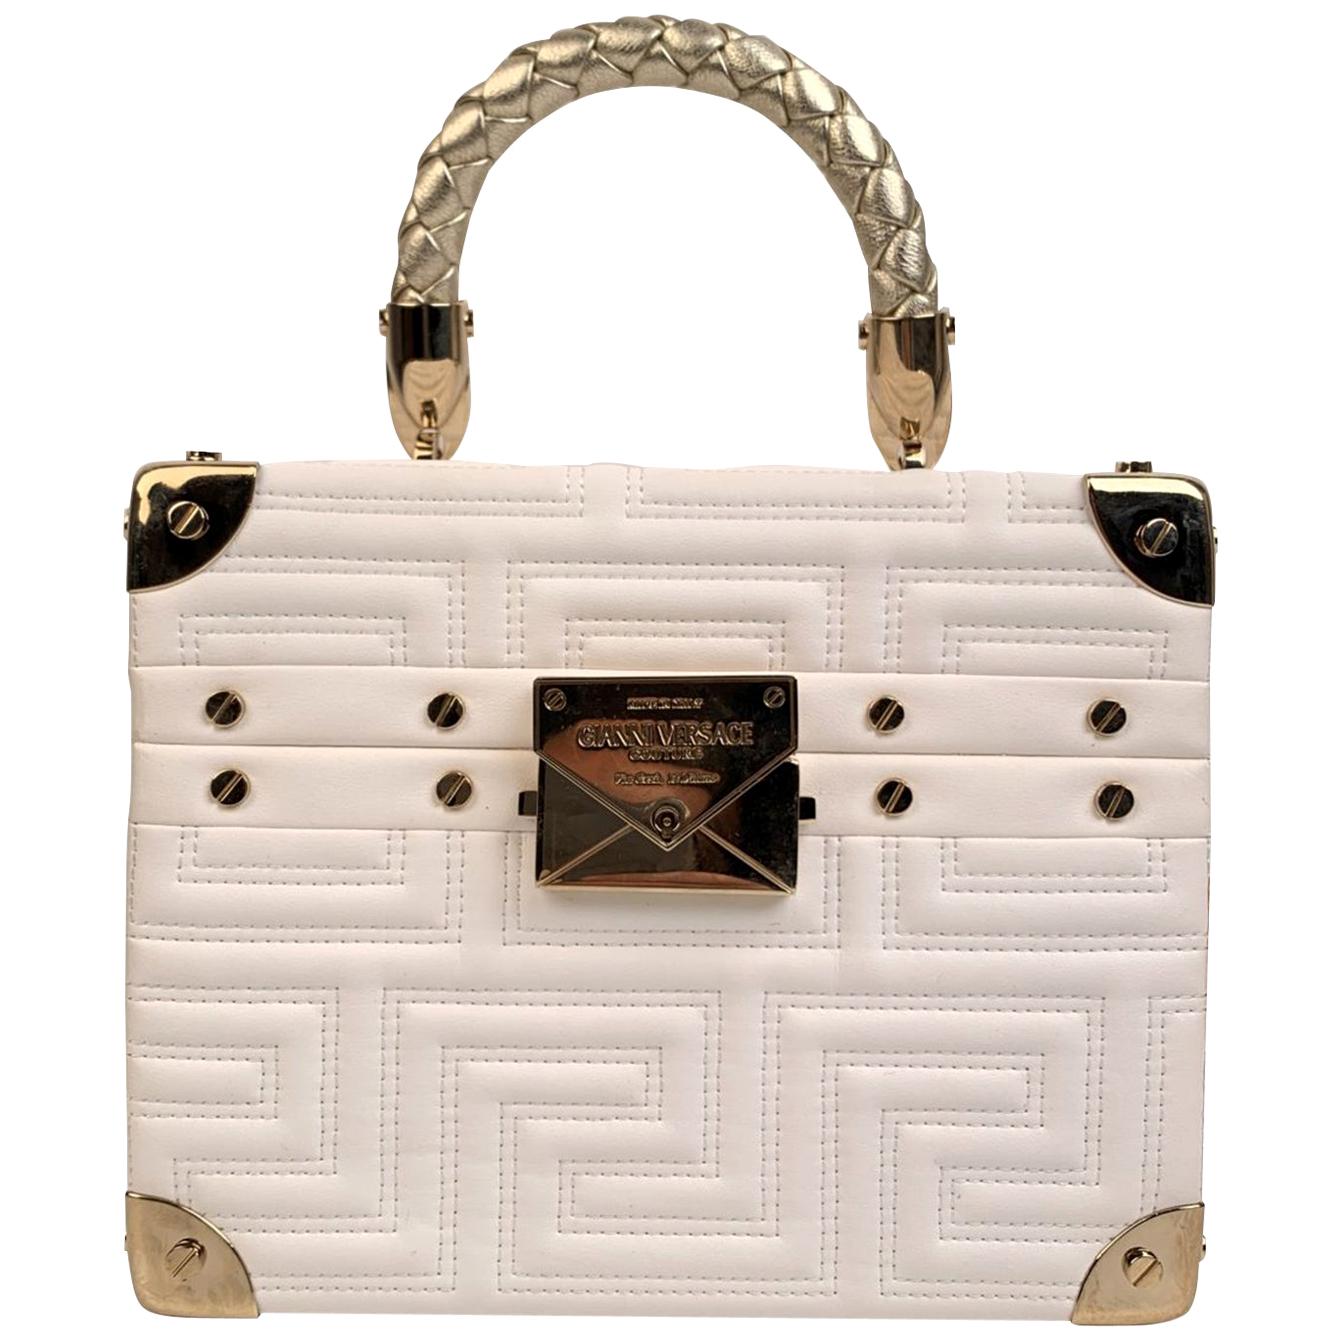 gianni versace couture purse